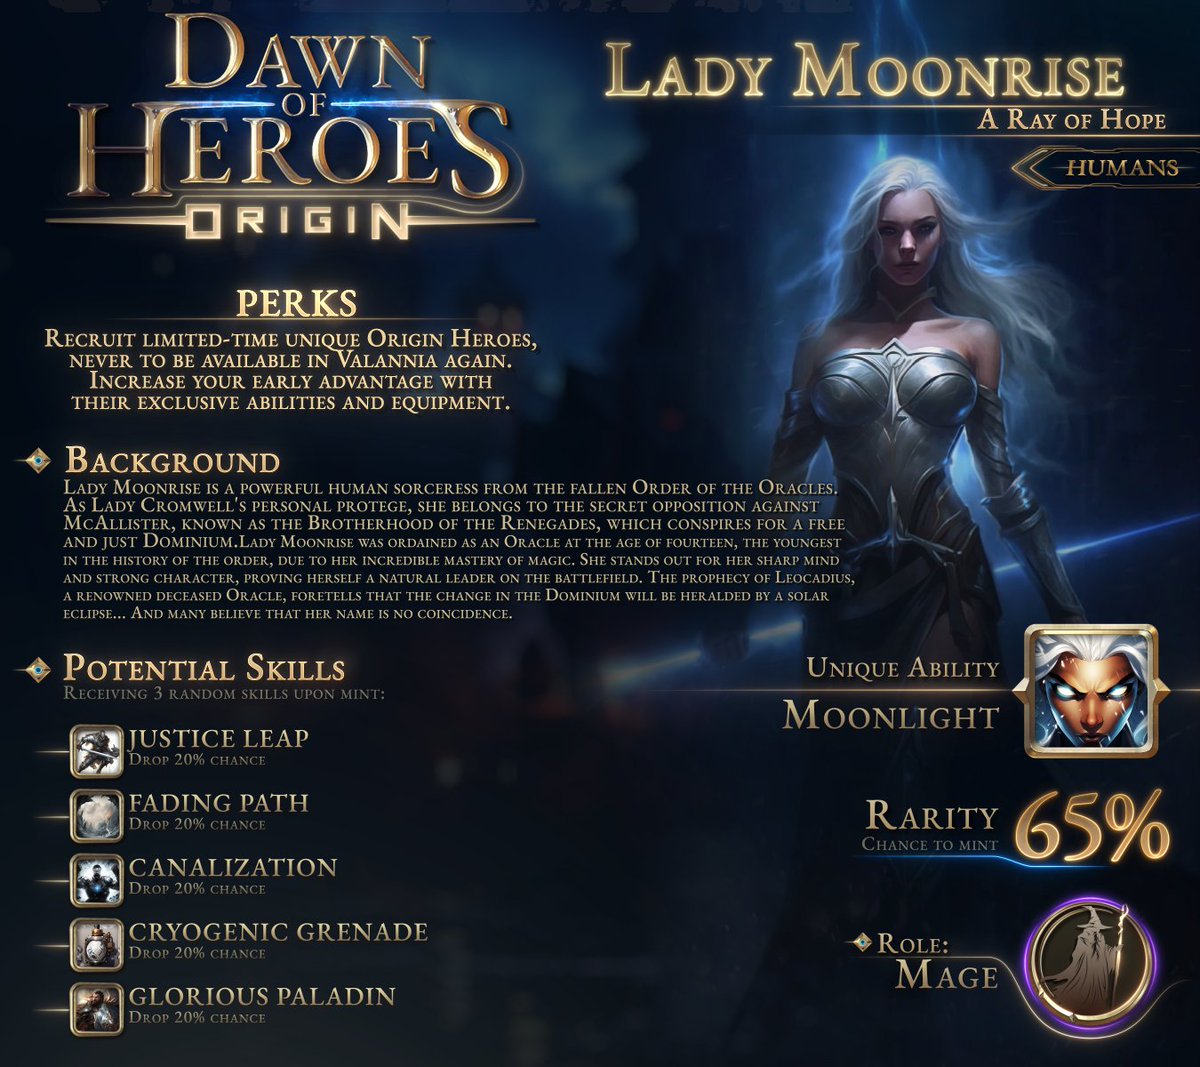 Dawnf of Heroes - Origin | Lady Moonrise

🔸Is a powerful human sorceress from the fallen Order of the Oracles. She stands out for her sharp mind and strong character, proving herself a natural leader on the battlefield.

🔹Rarity: 65%
🔹Unique Ability: Moonlight

➡️ More…